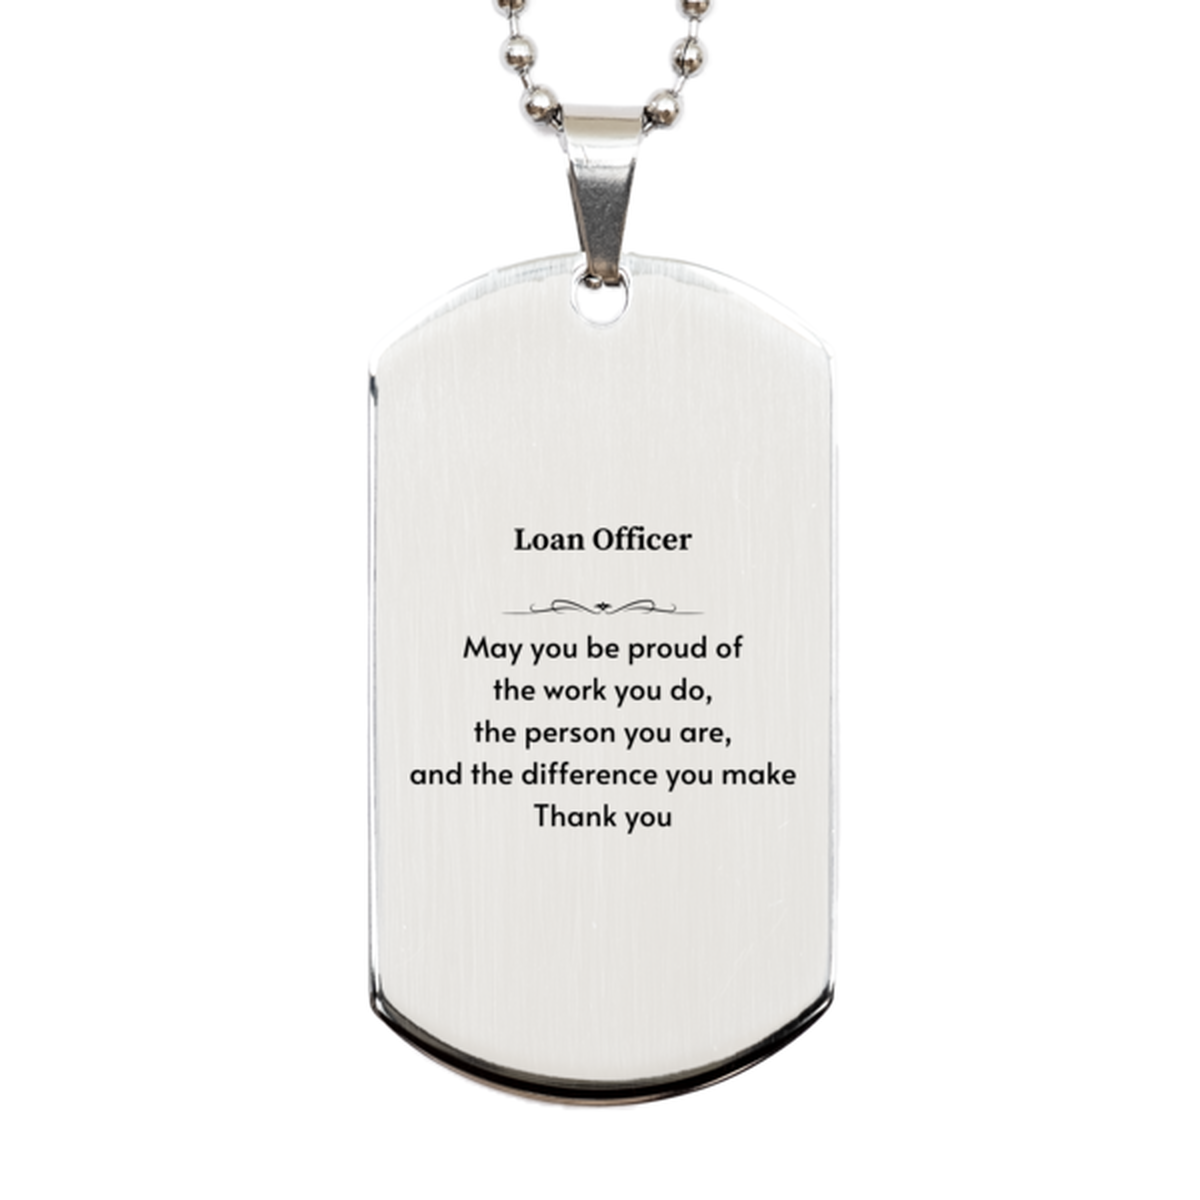 Heartwarming Silver Dog Tag Retirement Coworkers Gifts for Loan Officer, Loan Officer May You be proud of the work you do, the person you are Gifts for Boss Men Women Friends